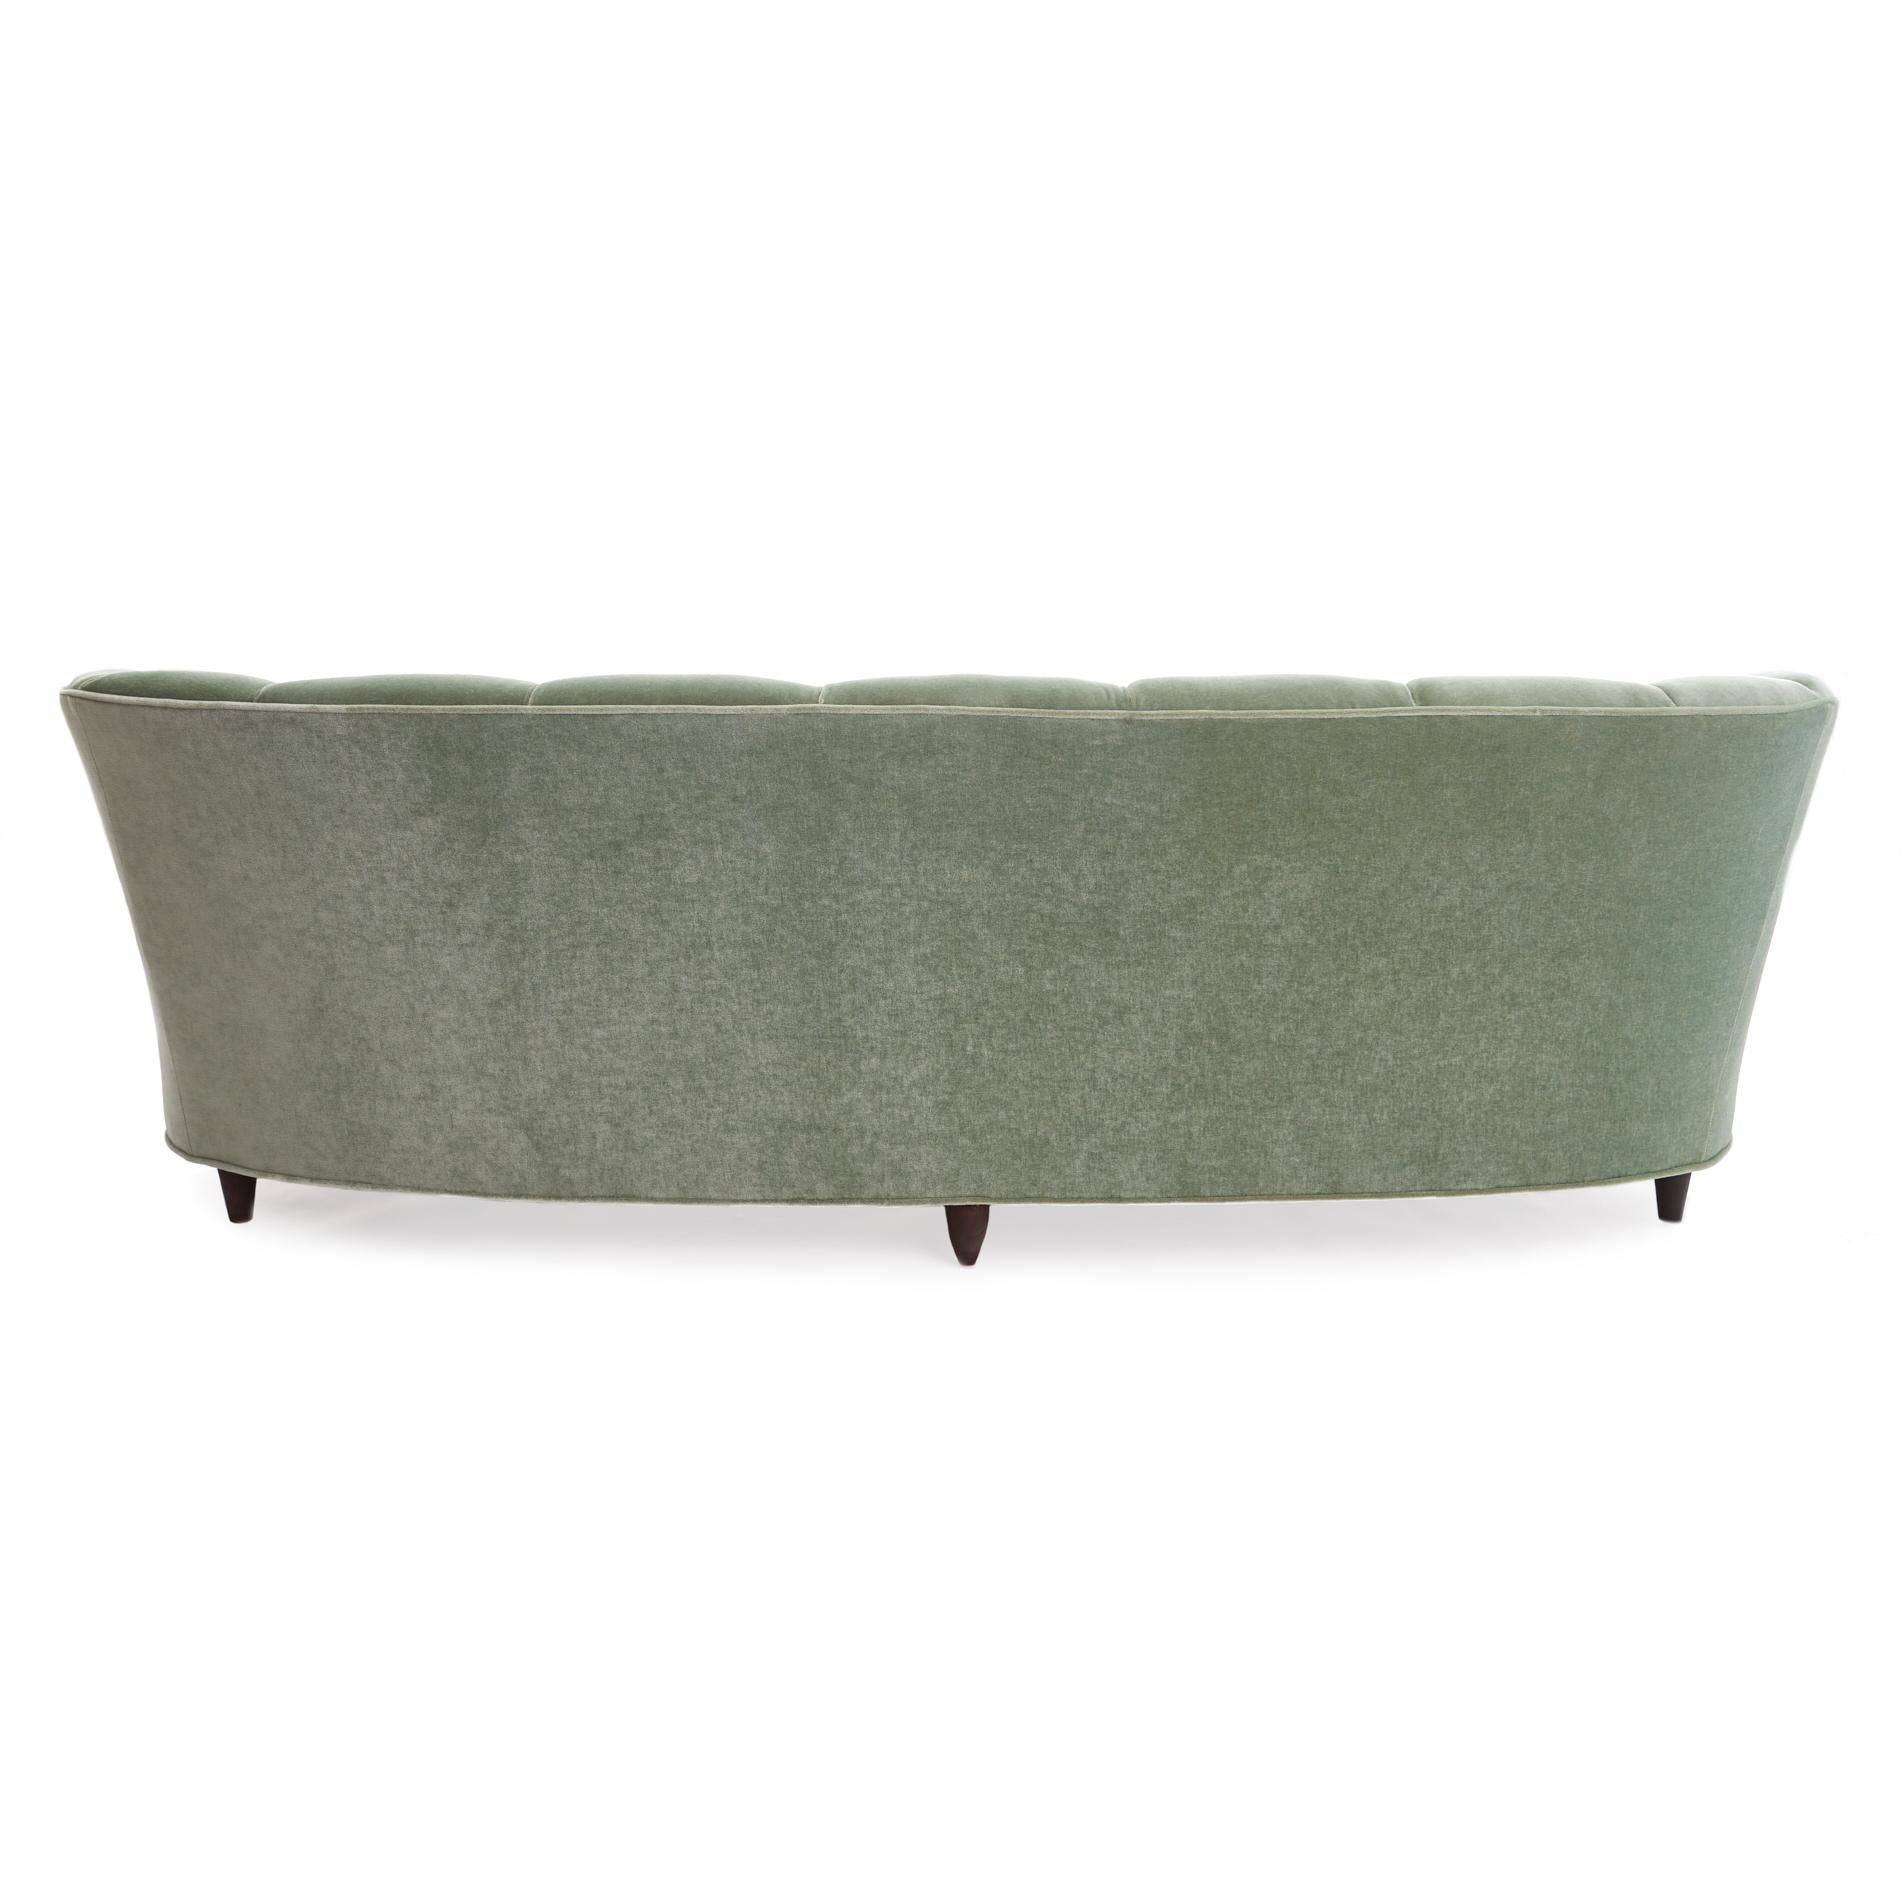 Exceptional midcentury Gio Ponti sofa, designed for Casa e Giardino. Newly reupholstered in a lush peridot mohair. Retains original tapered legs and supple curvature. Down stuffed and extravagantly elegant scalloped edge cushions to perfectly nestle